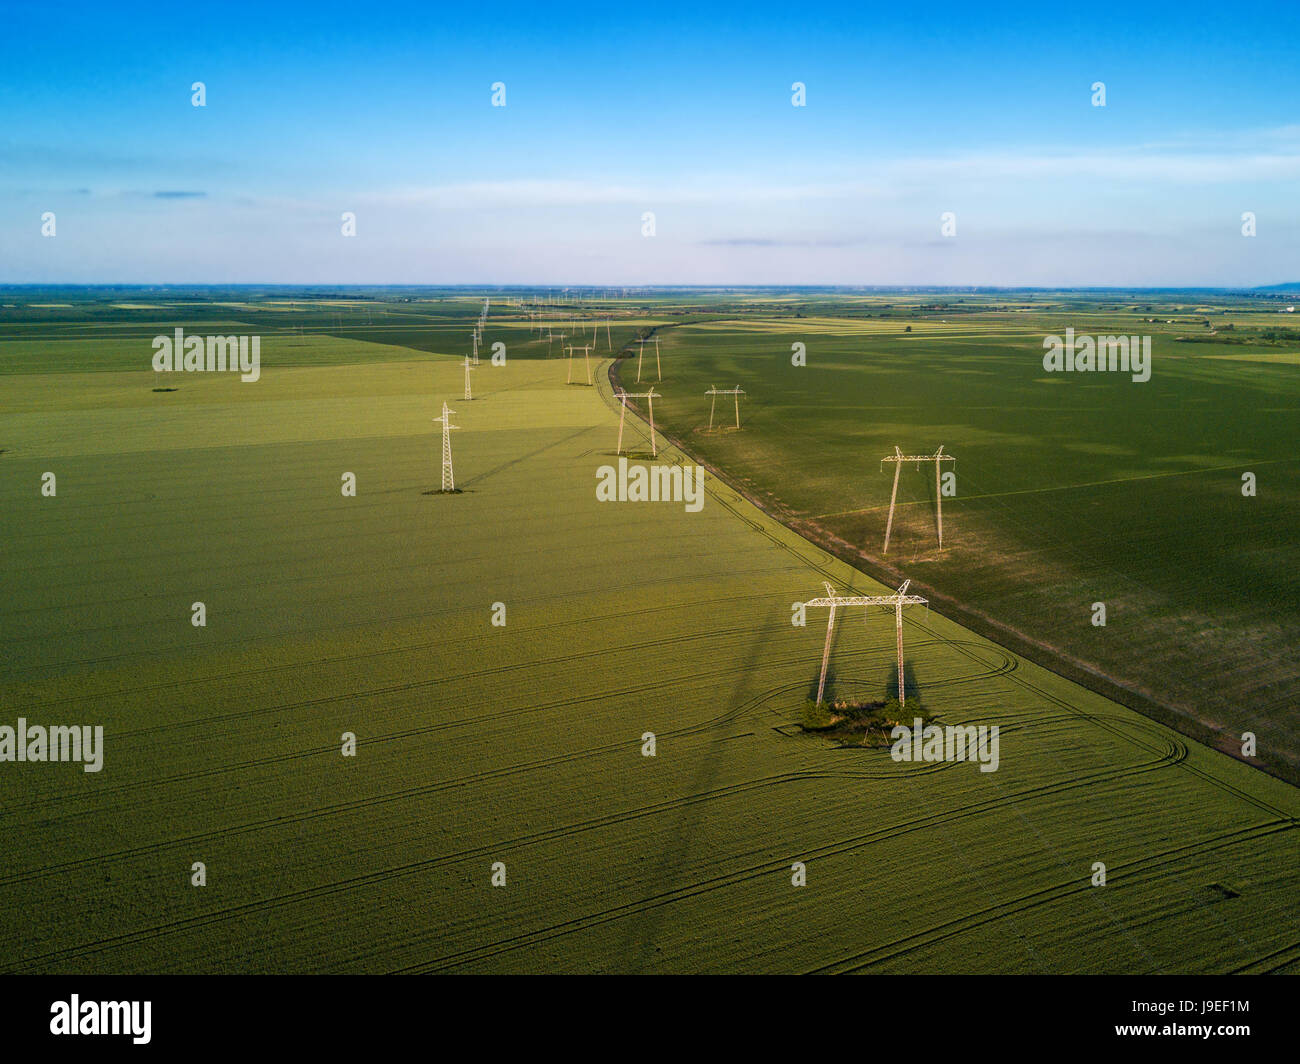 Aerial view of overhead electricity power line pylons in plain landscape Stock Photo